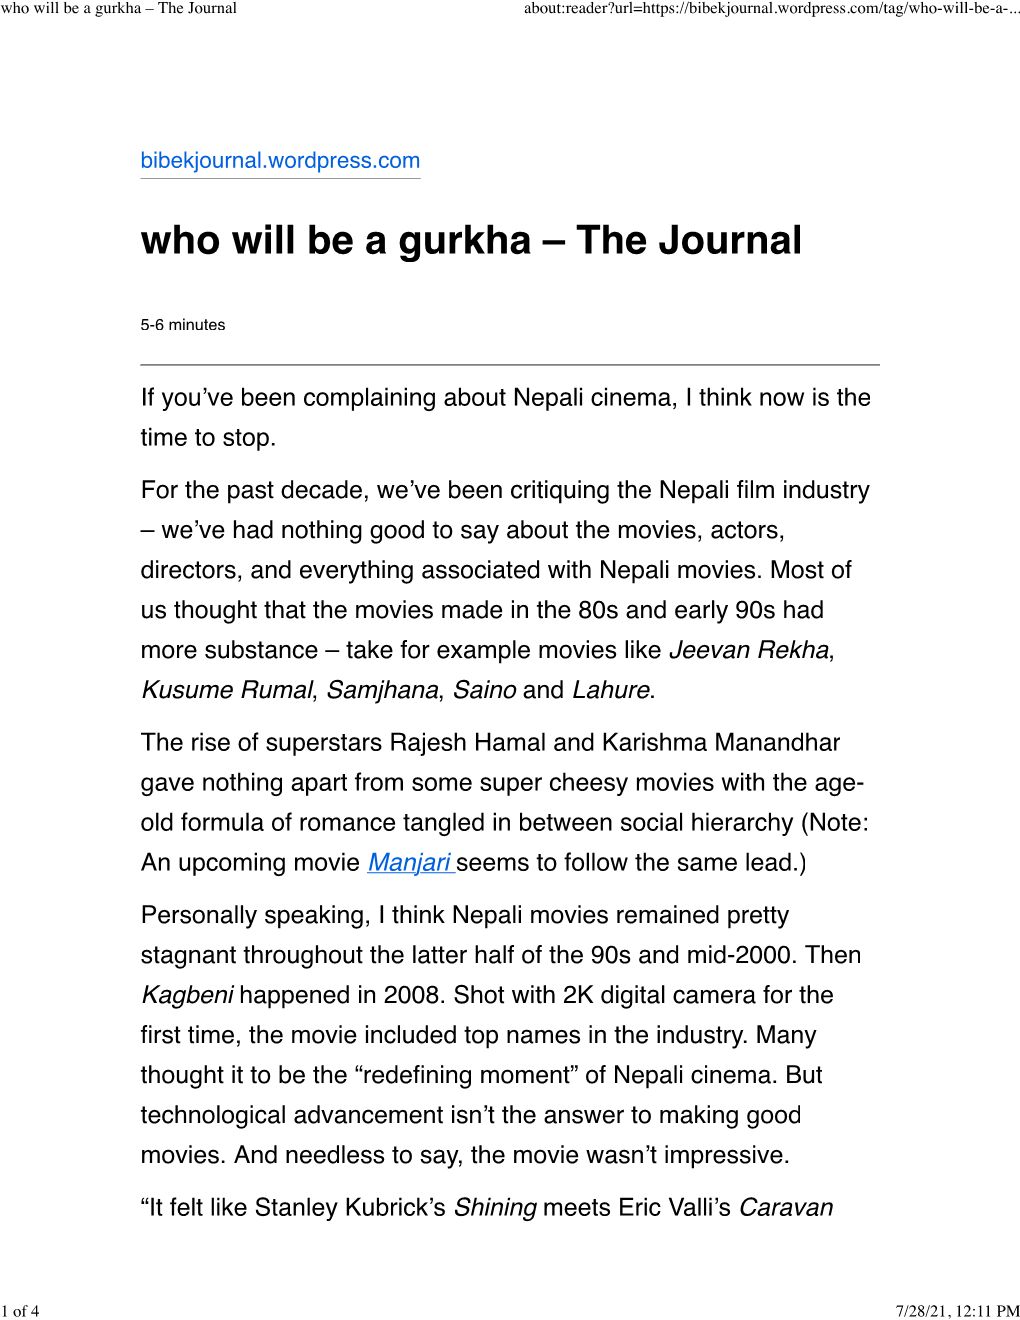 Who Will Be a Gurkha – the Journal About:Reader?Url=